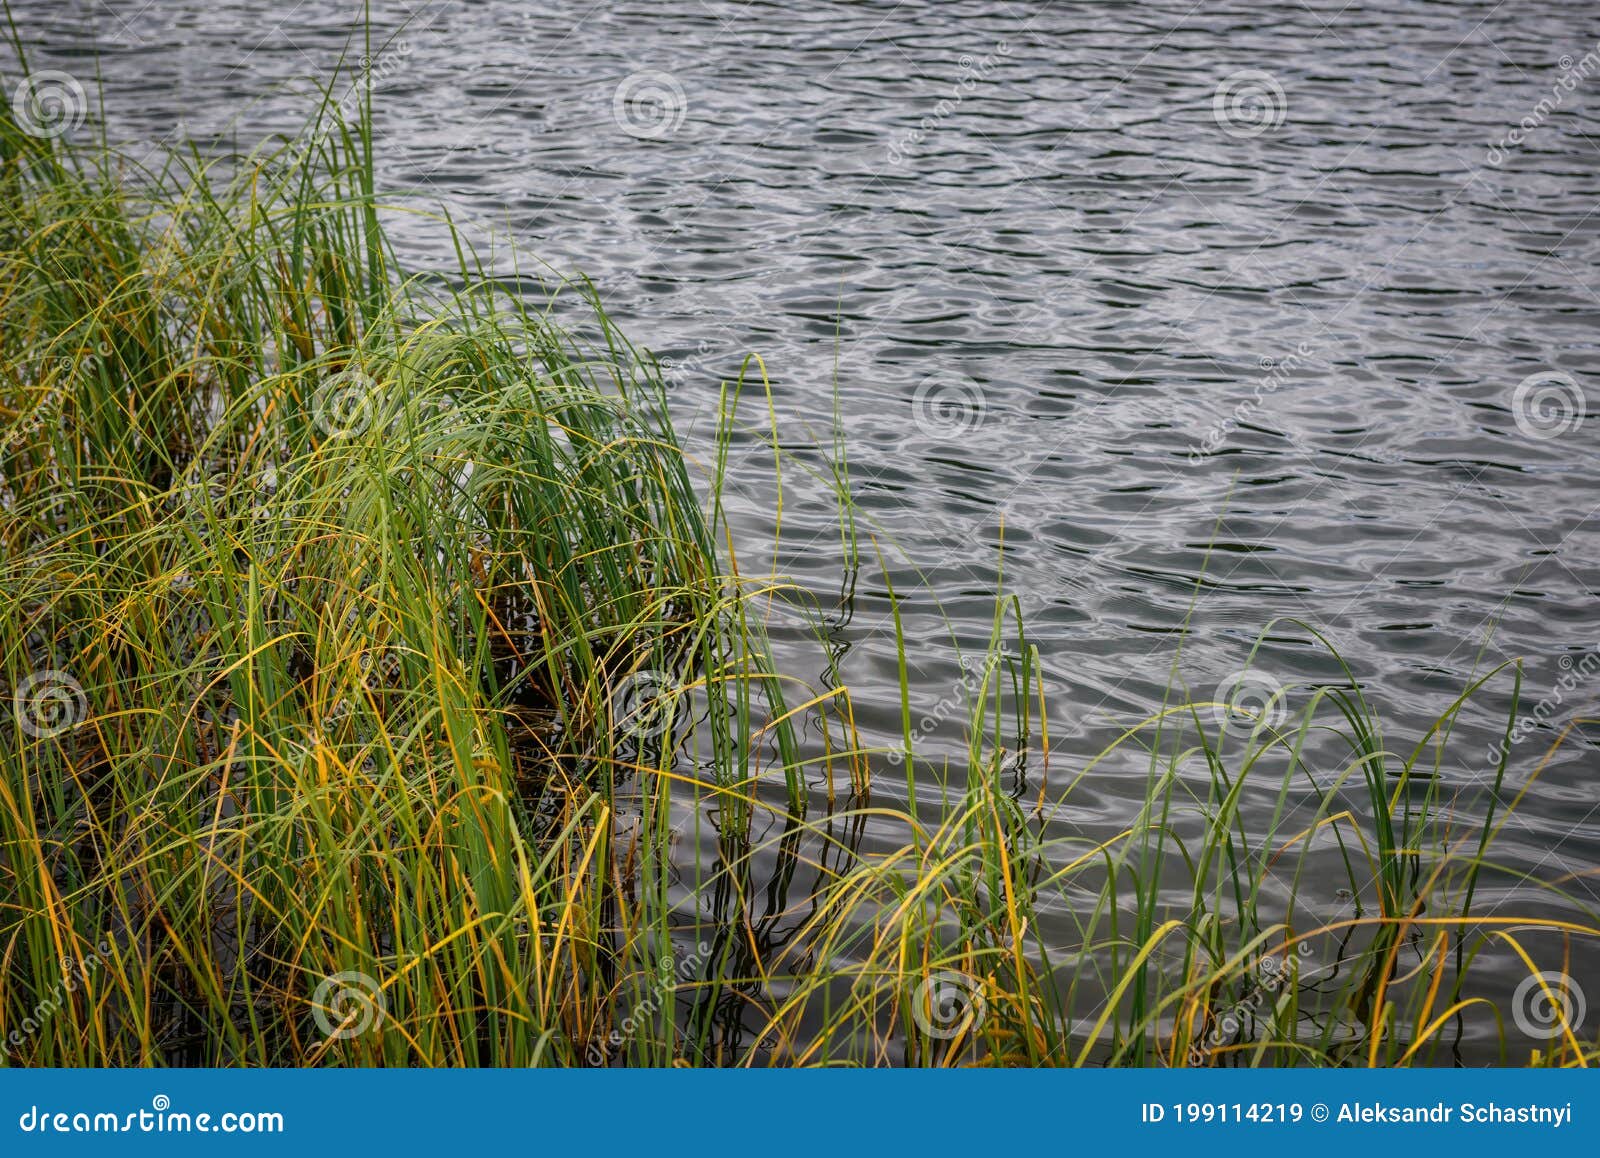 Bank Overgrown with Grass, Close-up. Reeds on the River. Green Grass in ...